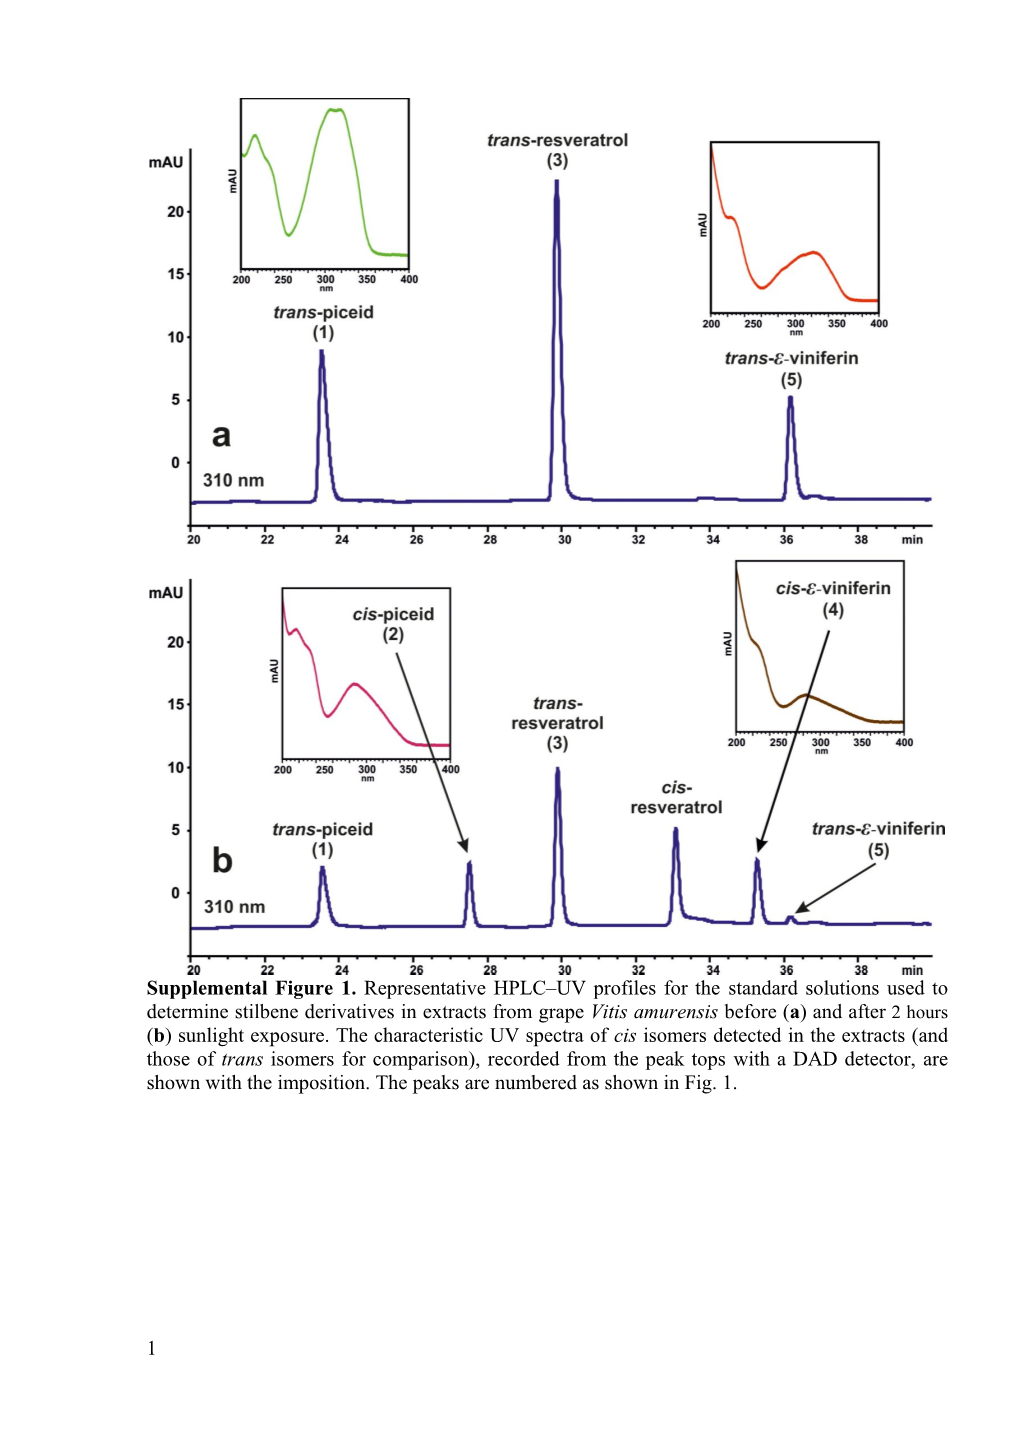 Supplemental Figure 1. Representative HPLC UV Profiles for the Standard Solutions Used